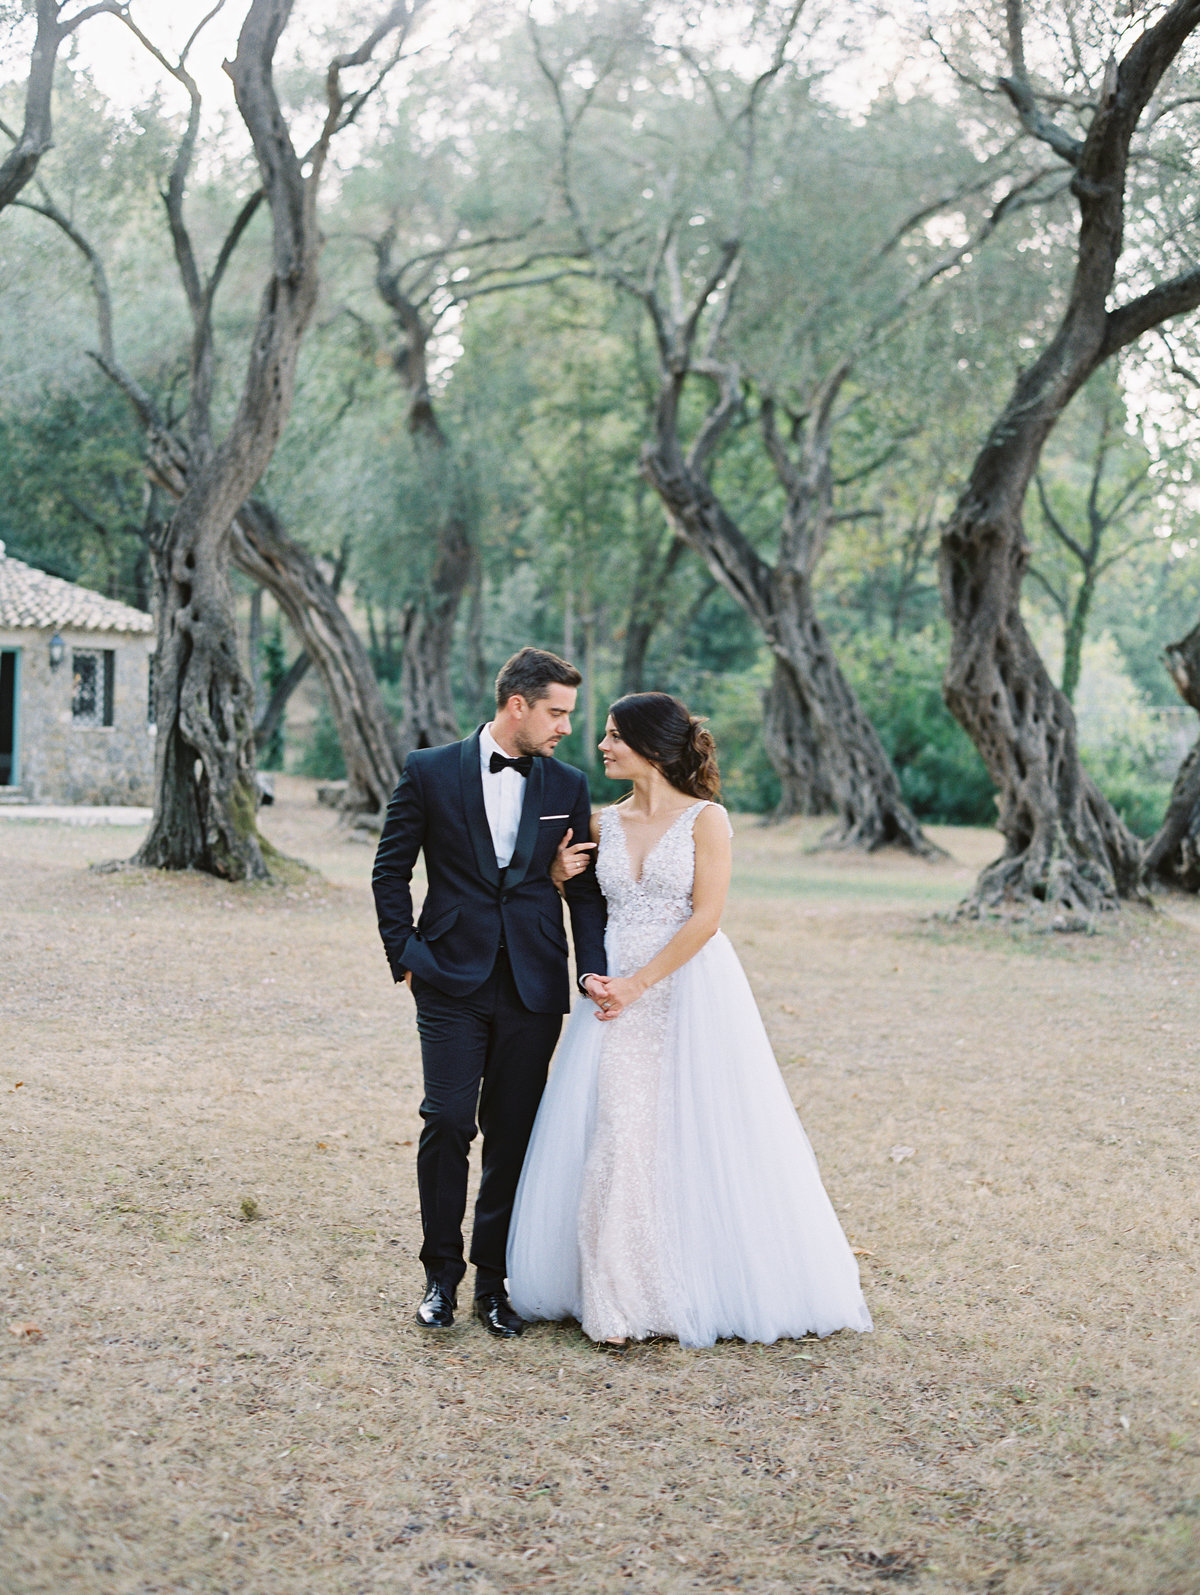 fine art wedding photography in corfu by Kostis Mouselimis on film_053